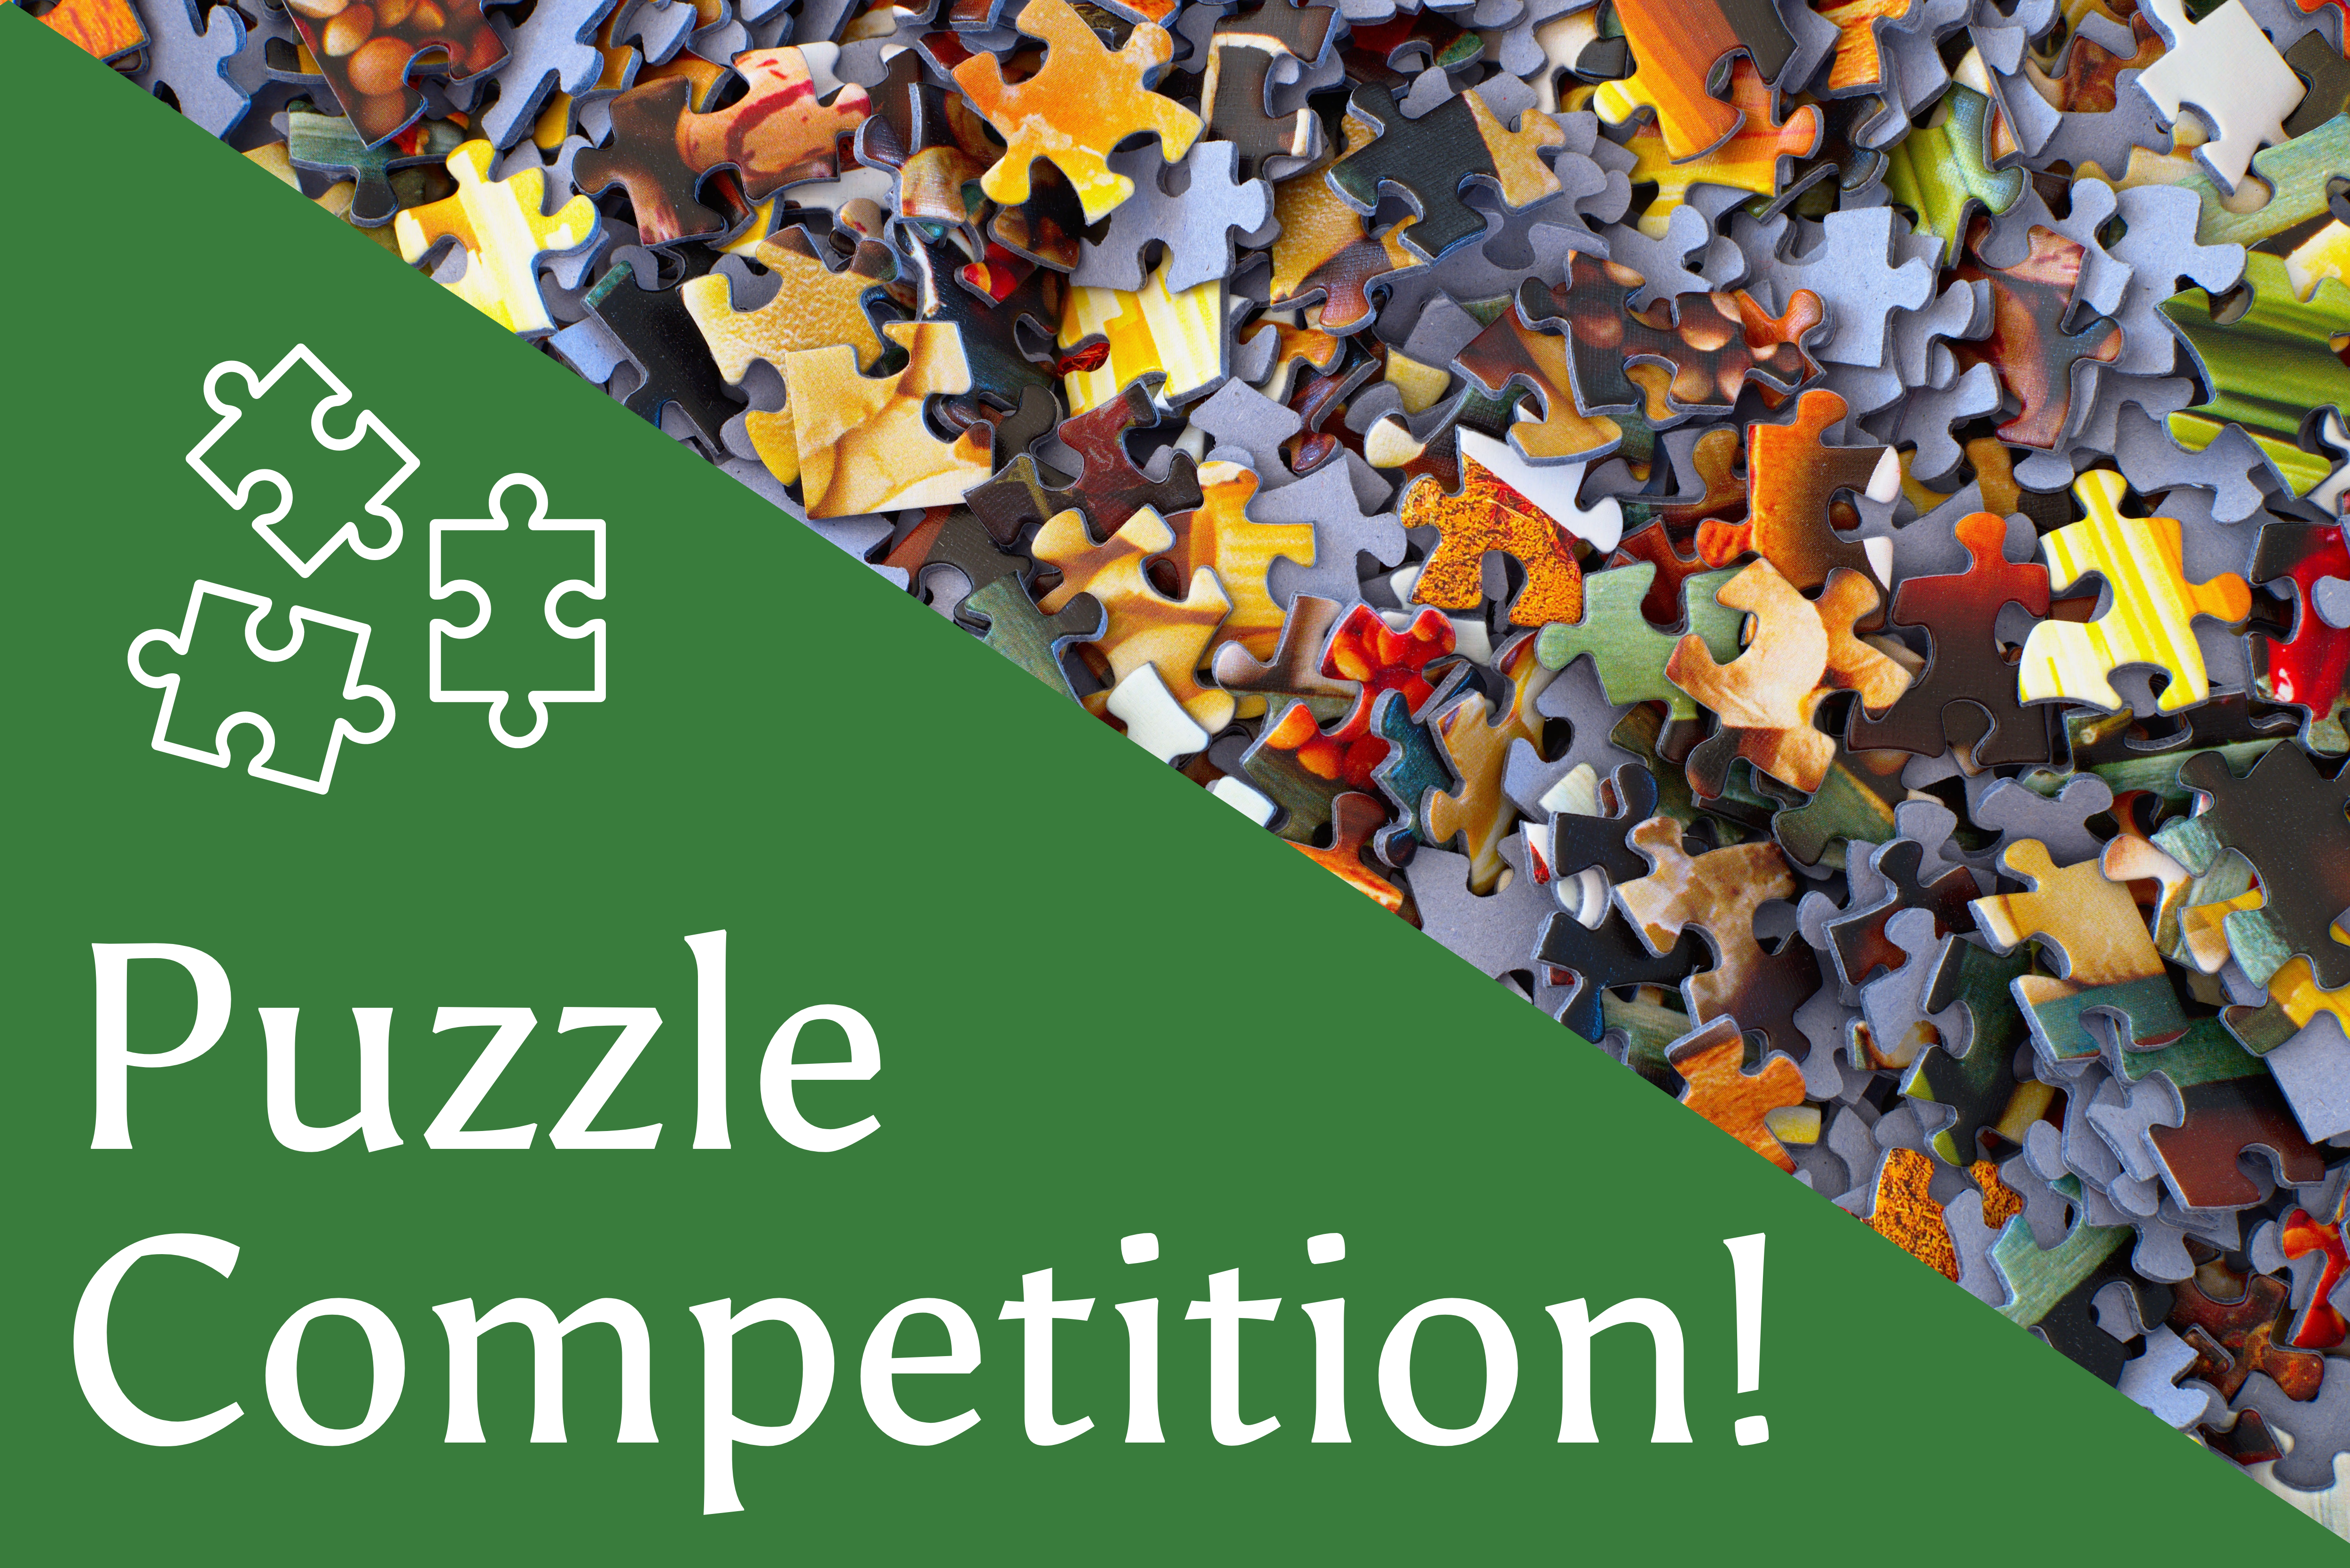 Featured image and link for a Puzzle Competition